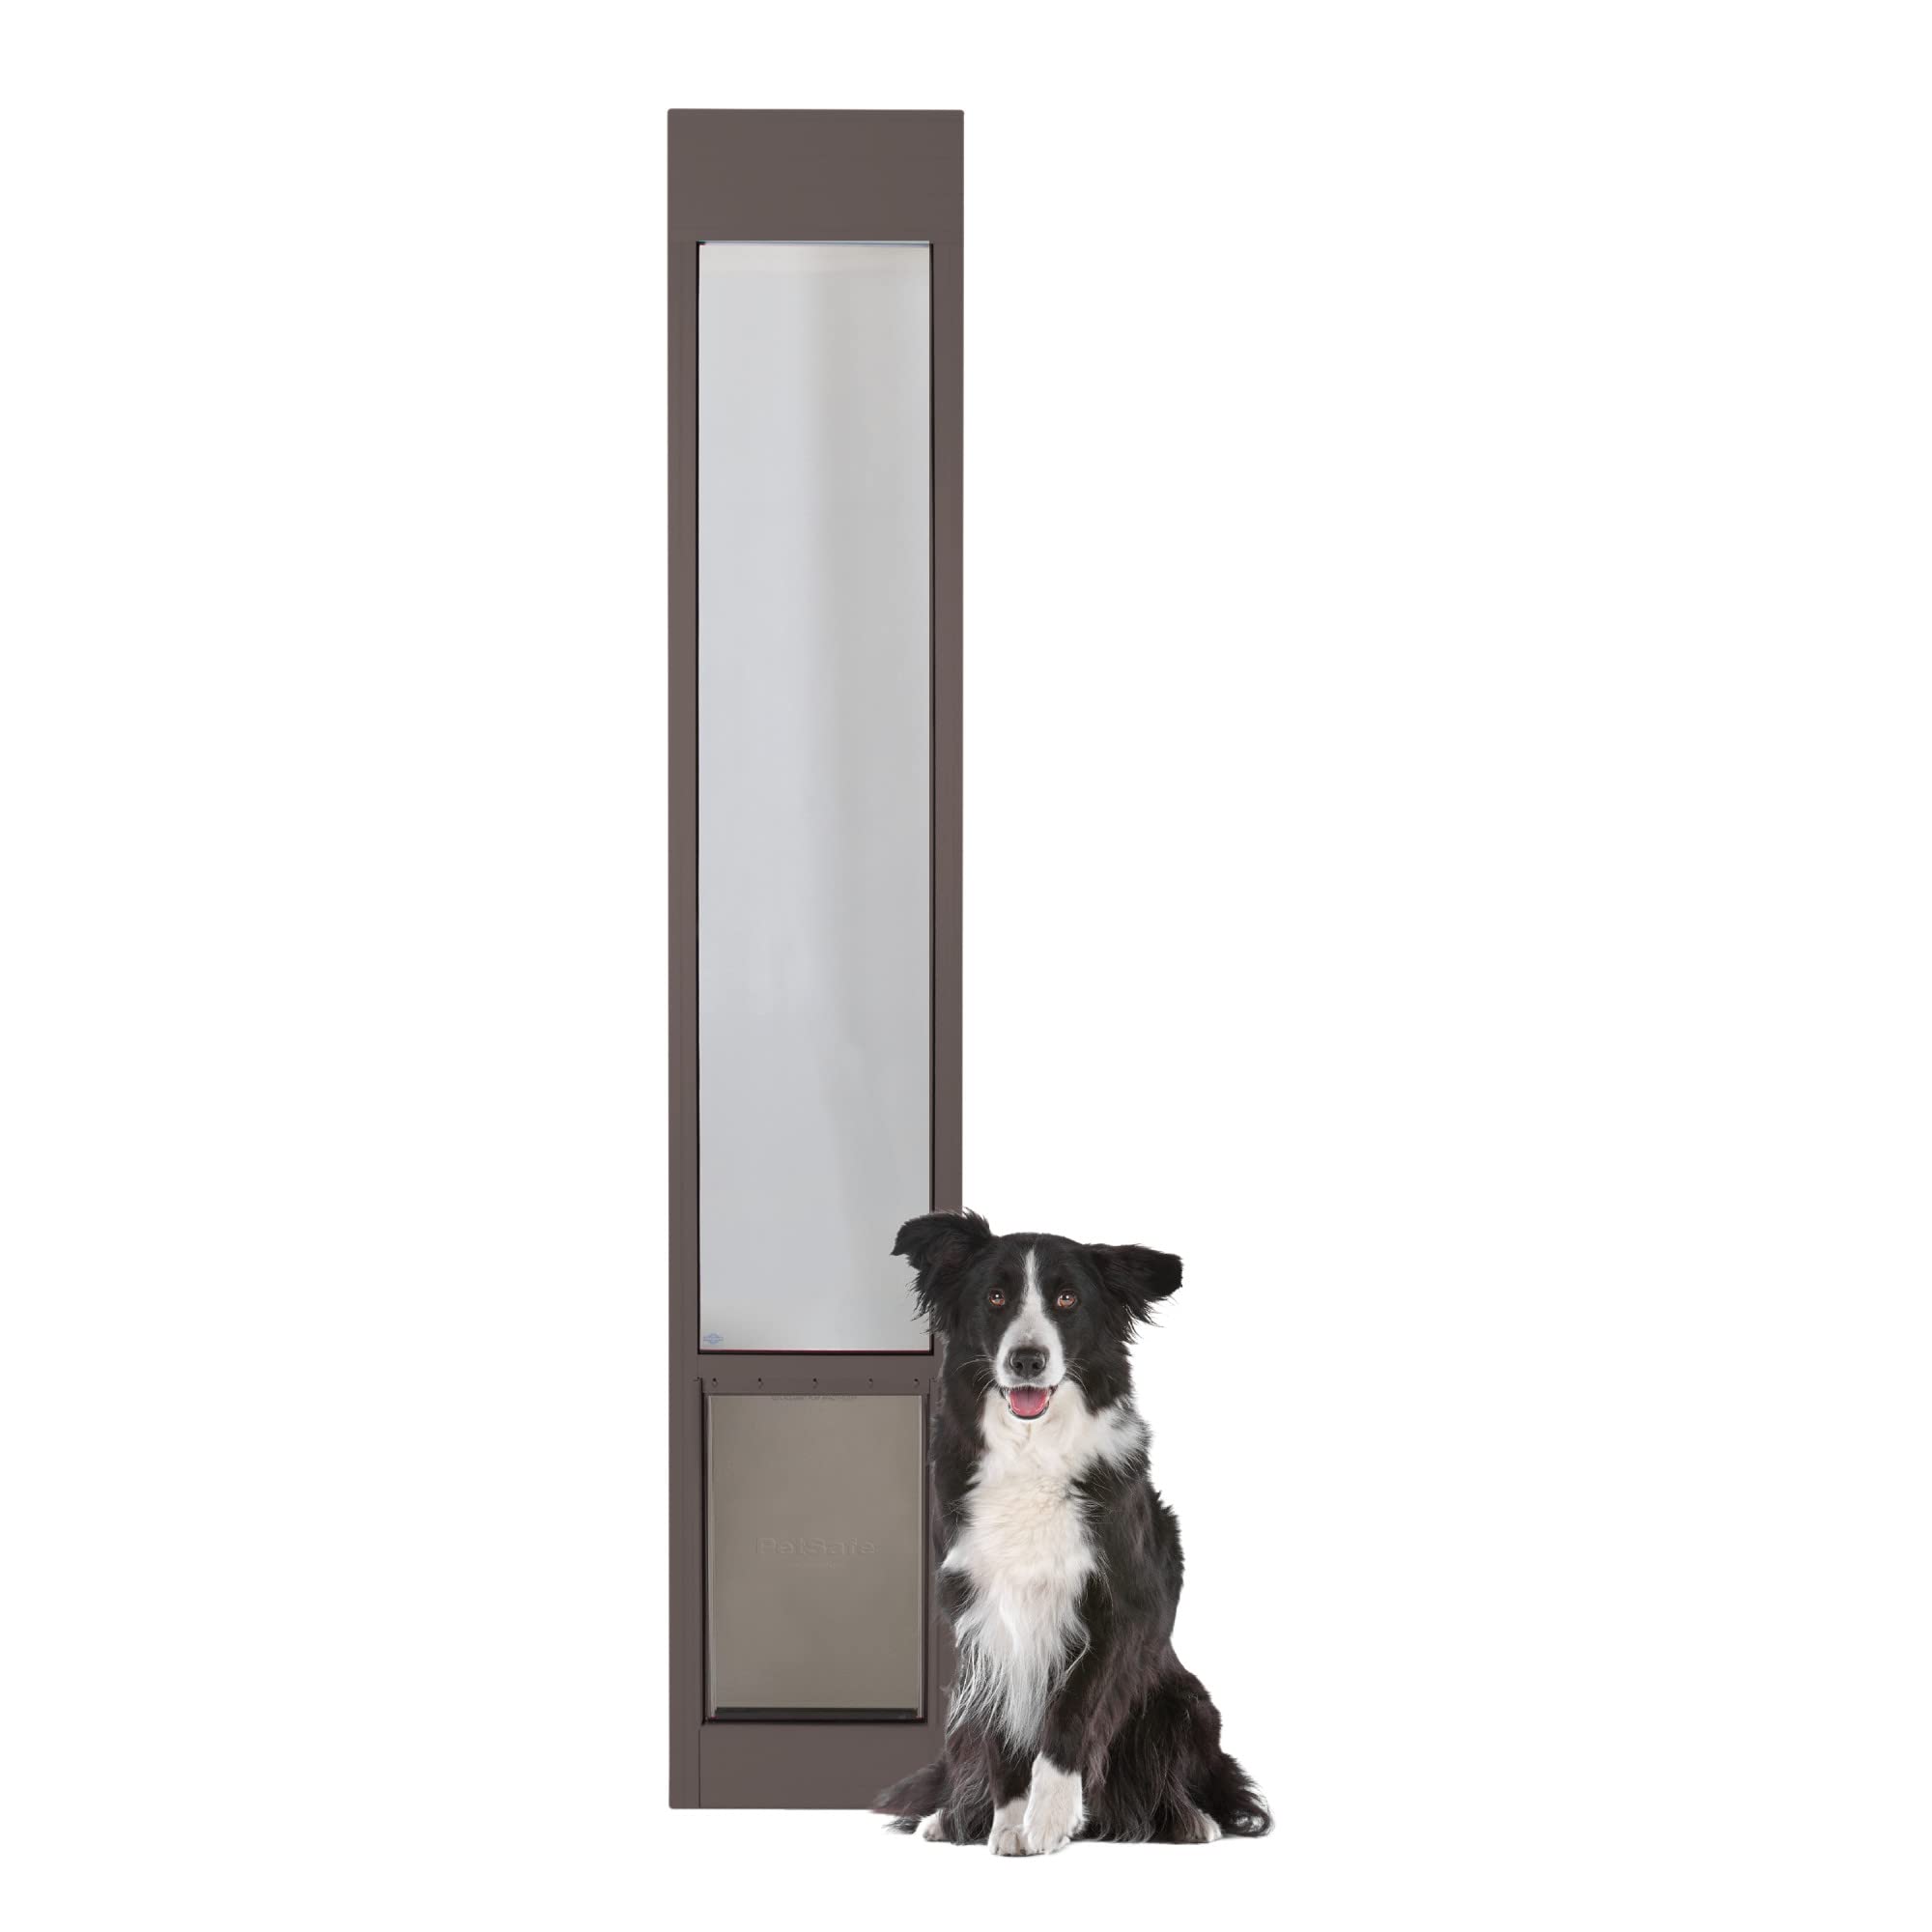 PetSafe 1-Piece Sliding Glass Pet Door - Outdoor Access Patio Panel Insert for Dogs and Cats, Easy No-Cut Installation, Weather-Resistant Aluminum Insert, Includes Slide-in Closing Panel for Security